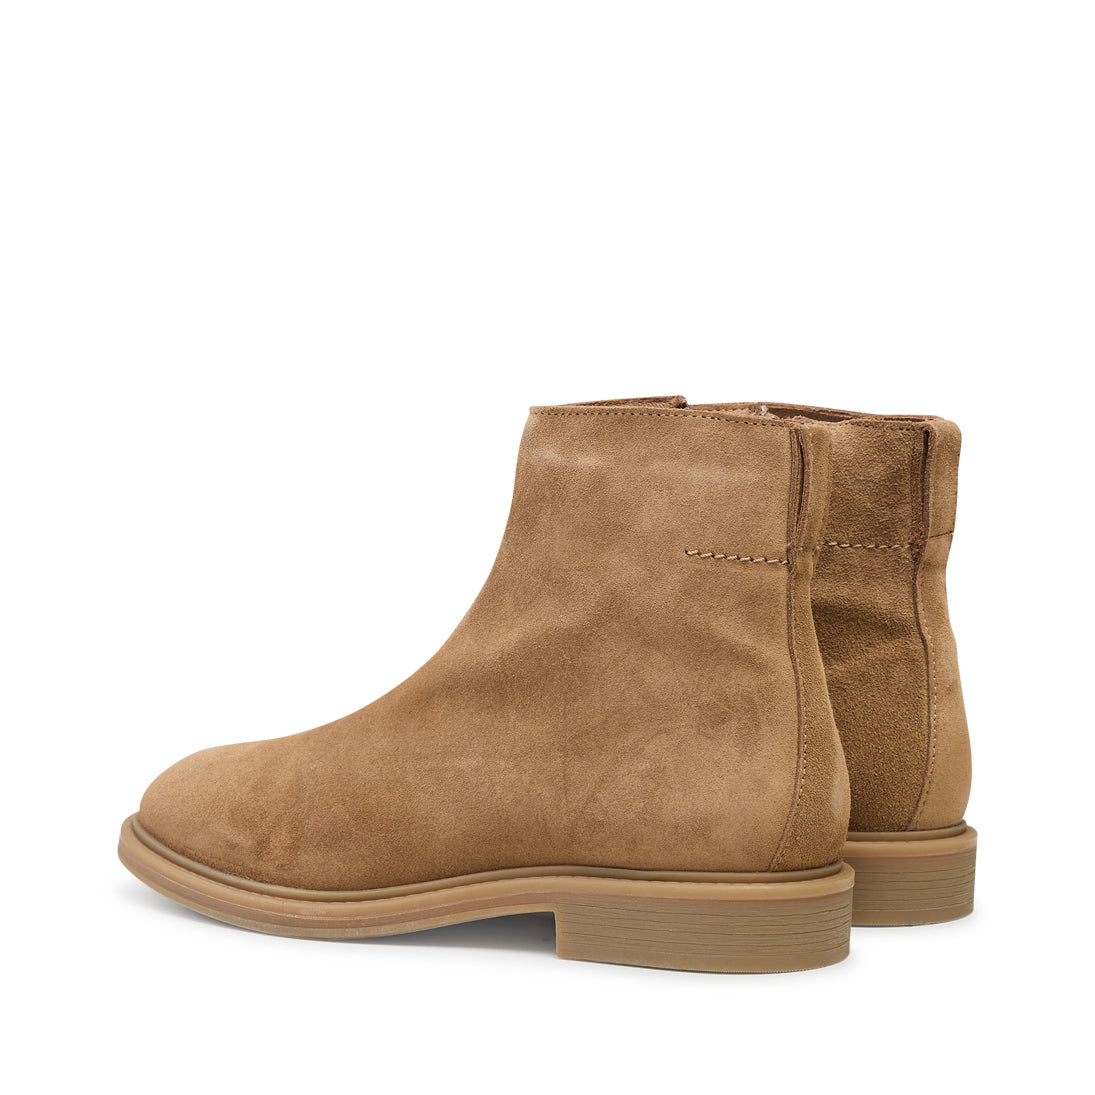 Pavement Men Claus suede Boots Taupe suede 174